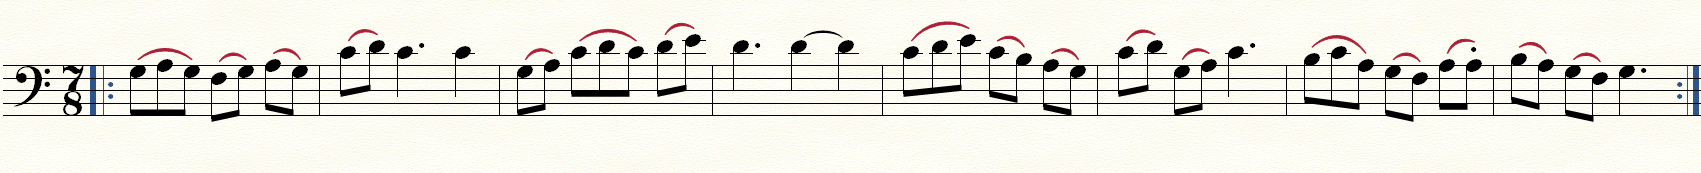 Music notation showing a 7/8 setting of Veni Creator Spiritus in bass clef.